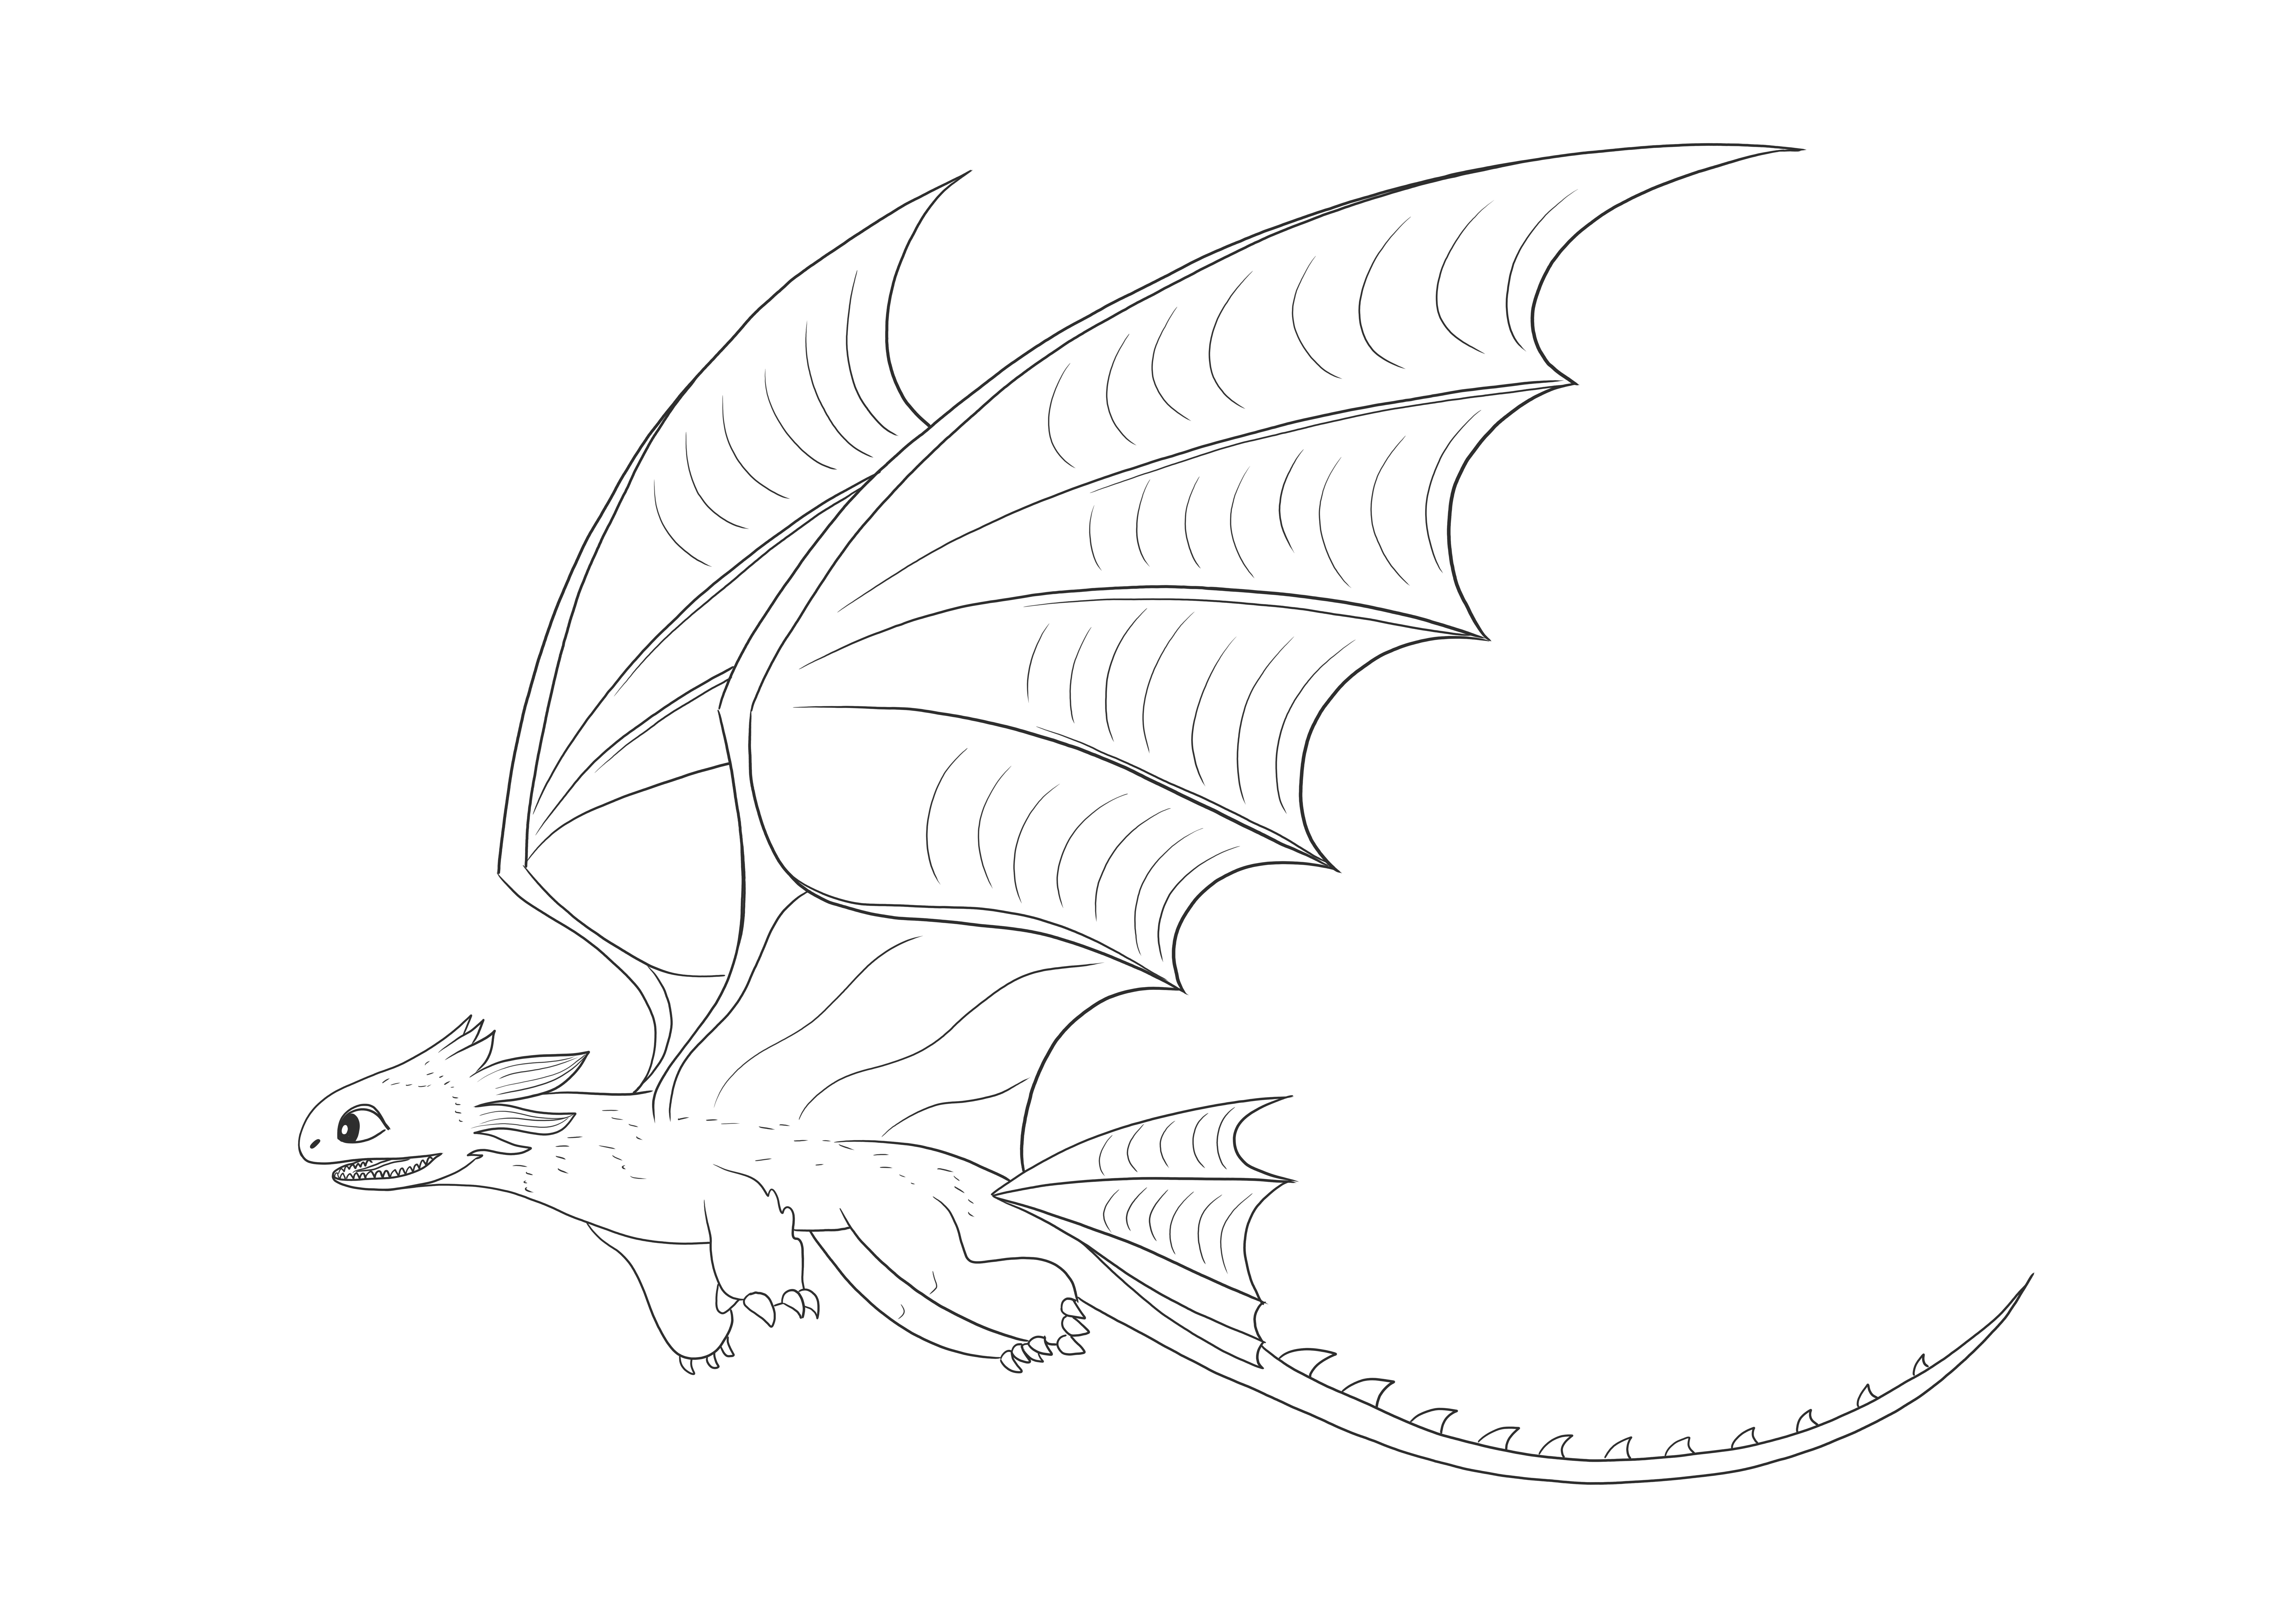 Toothless Dragon flying in the sky free coloring and printing